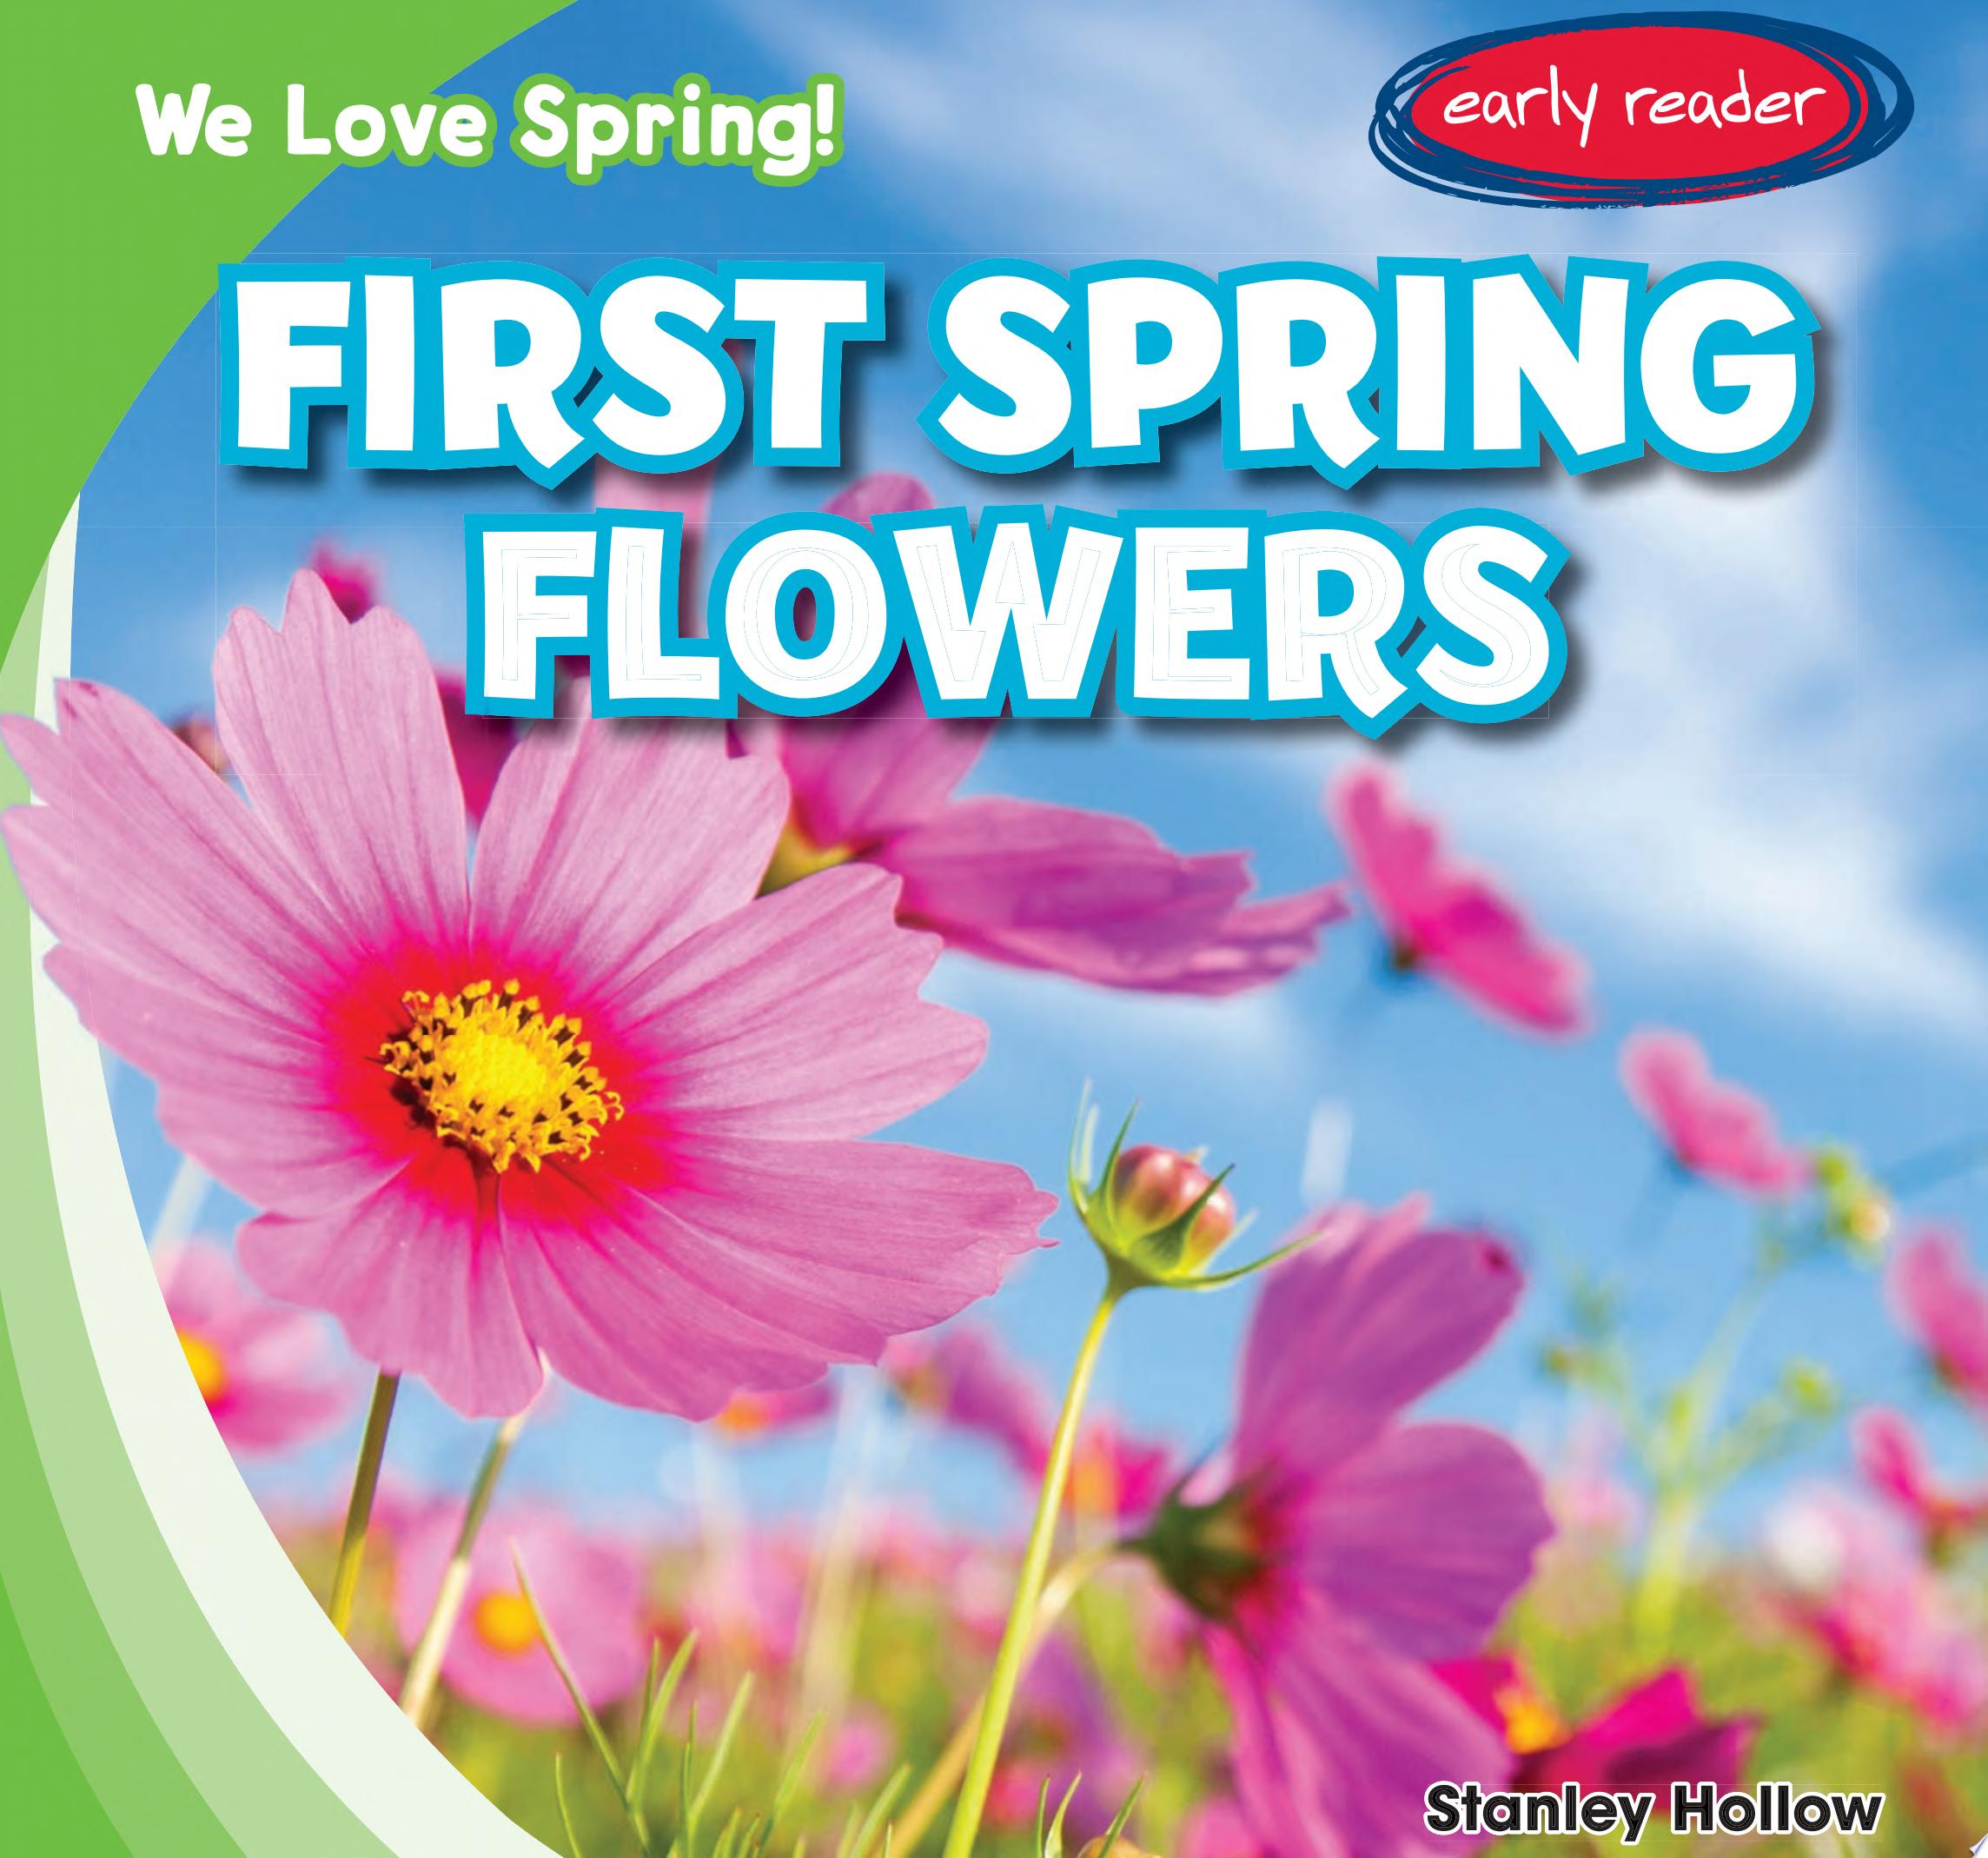 Image for "First Spring Flowers"